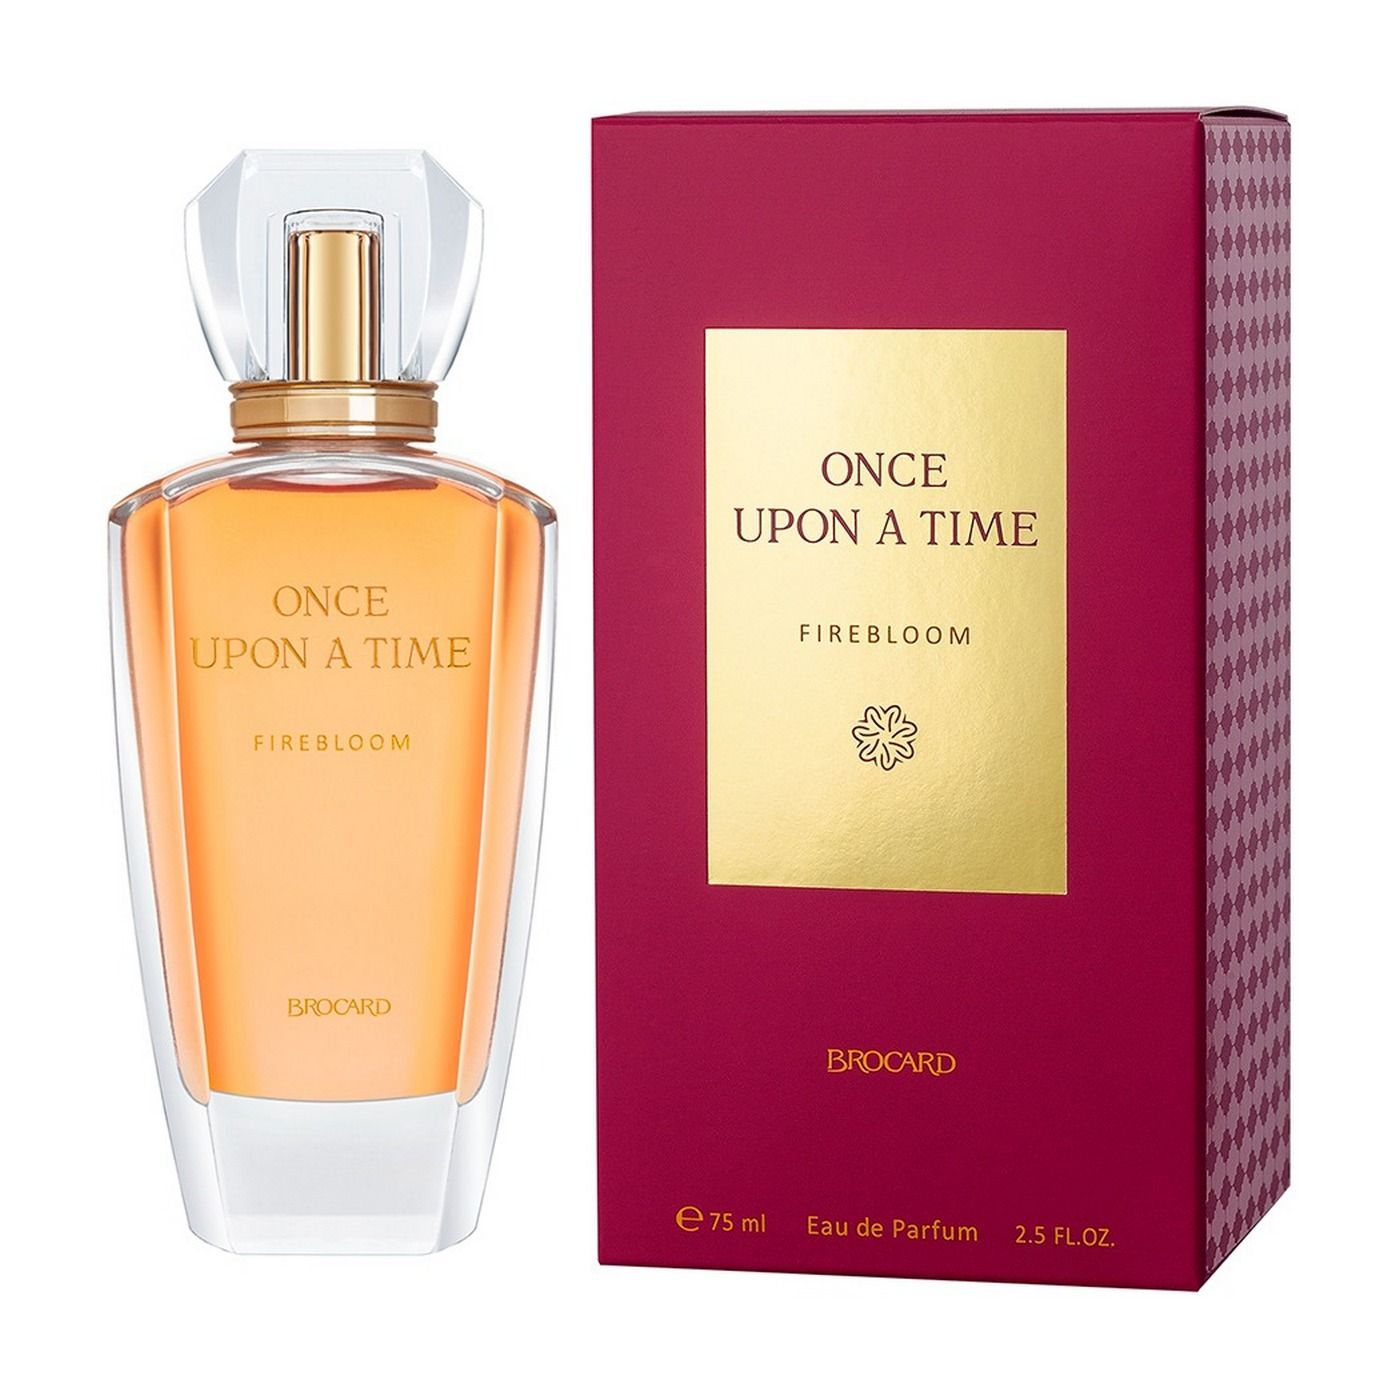 Once perfume. Once upon a time 1001 Jasmine Brocard. Духи от once Lorev. Firebloom. Blue boy - once upon a time.